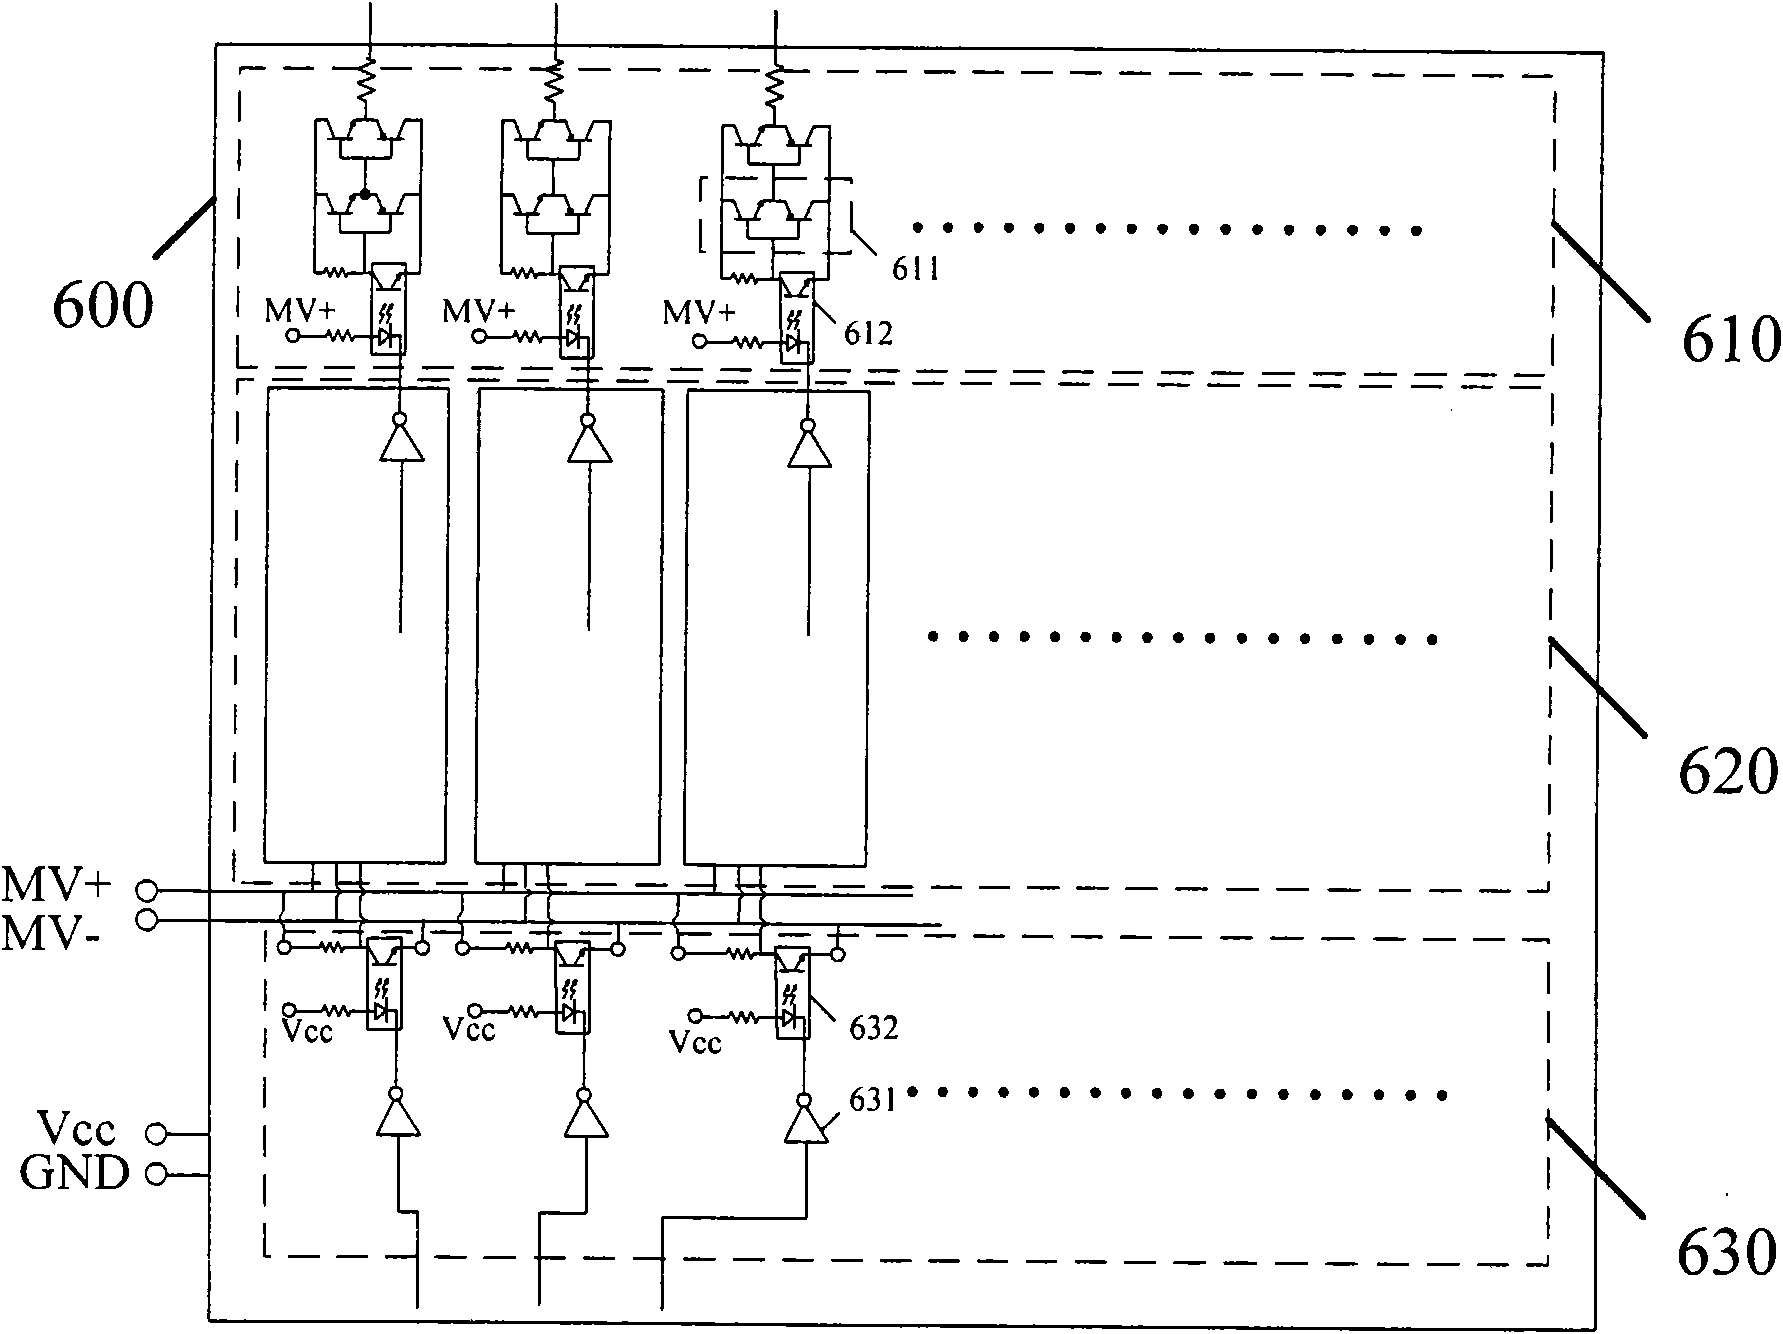 Isolation buffer two-level inversion circuit